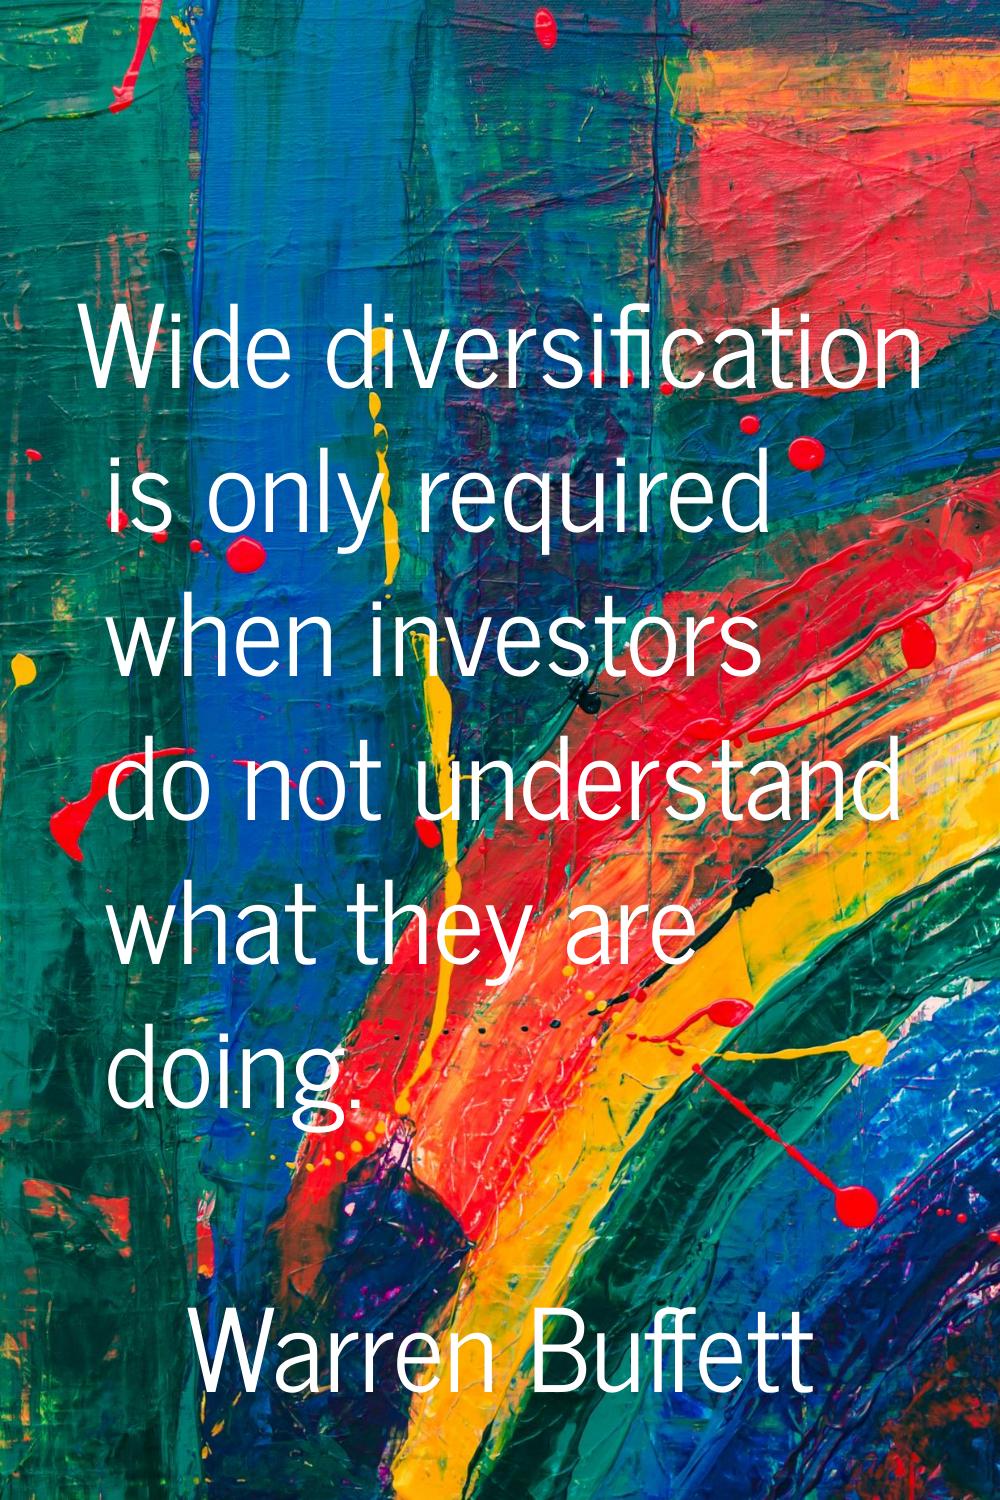 Wide diversification is only required when investors do not understand what they are doing.